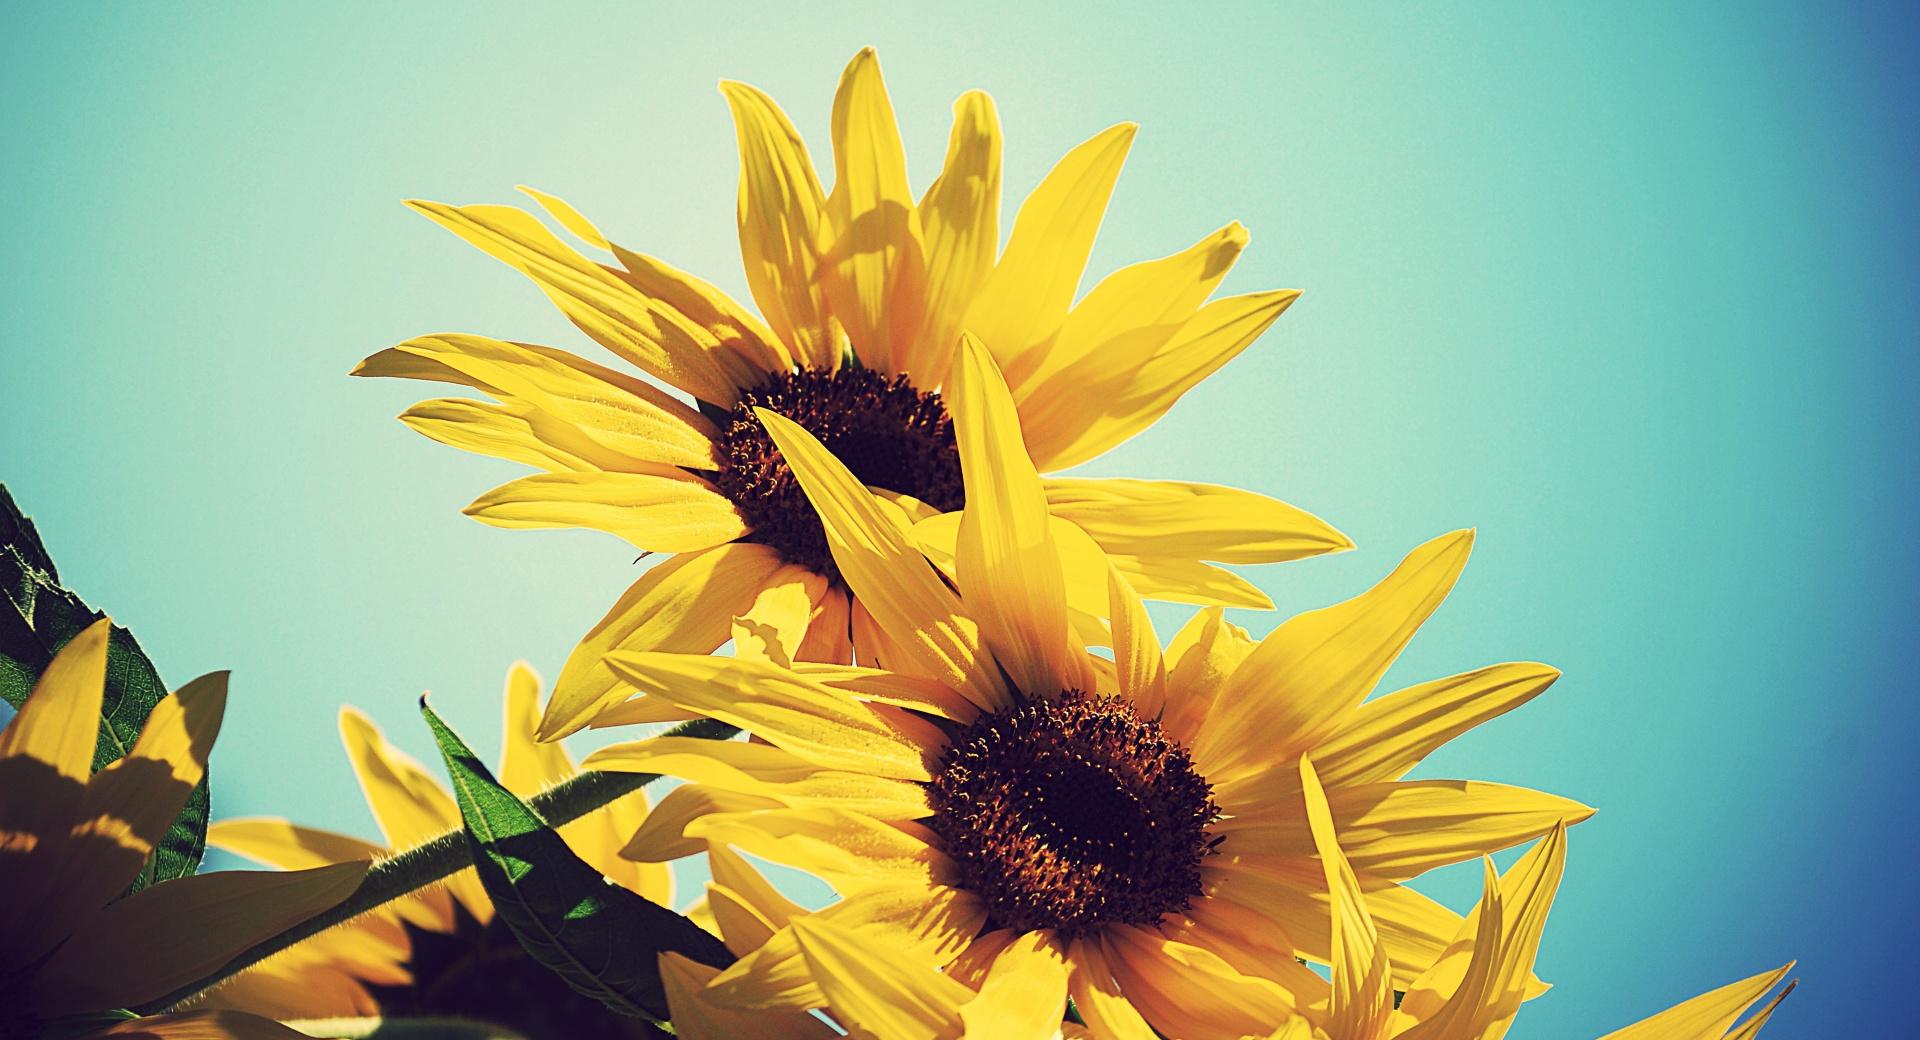 Sunflowers Against Blue Sky wallpapers HD quality